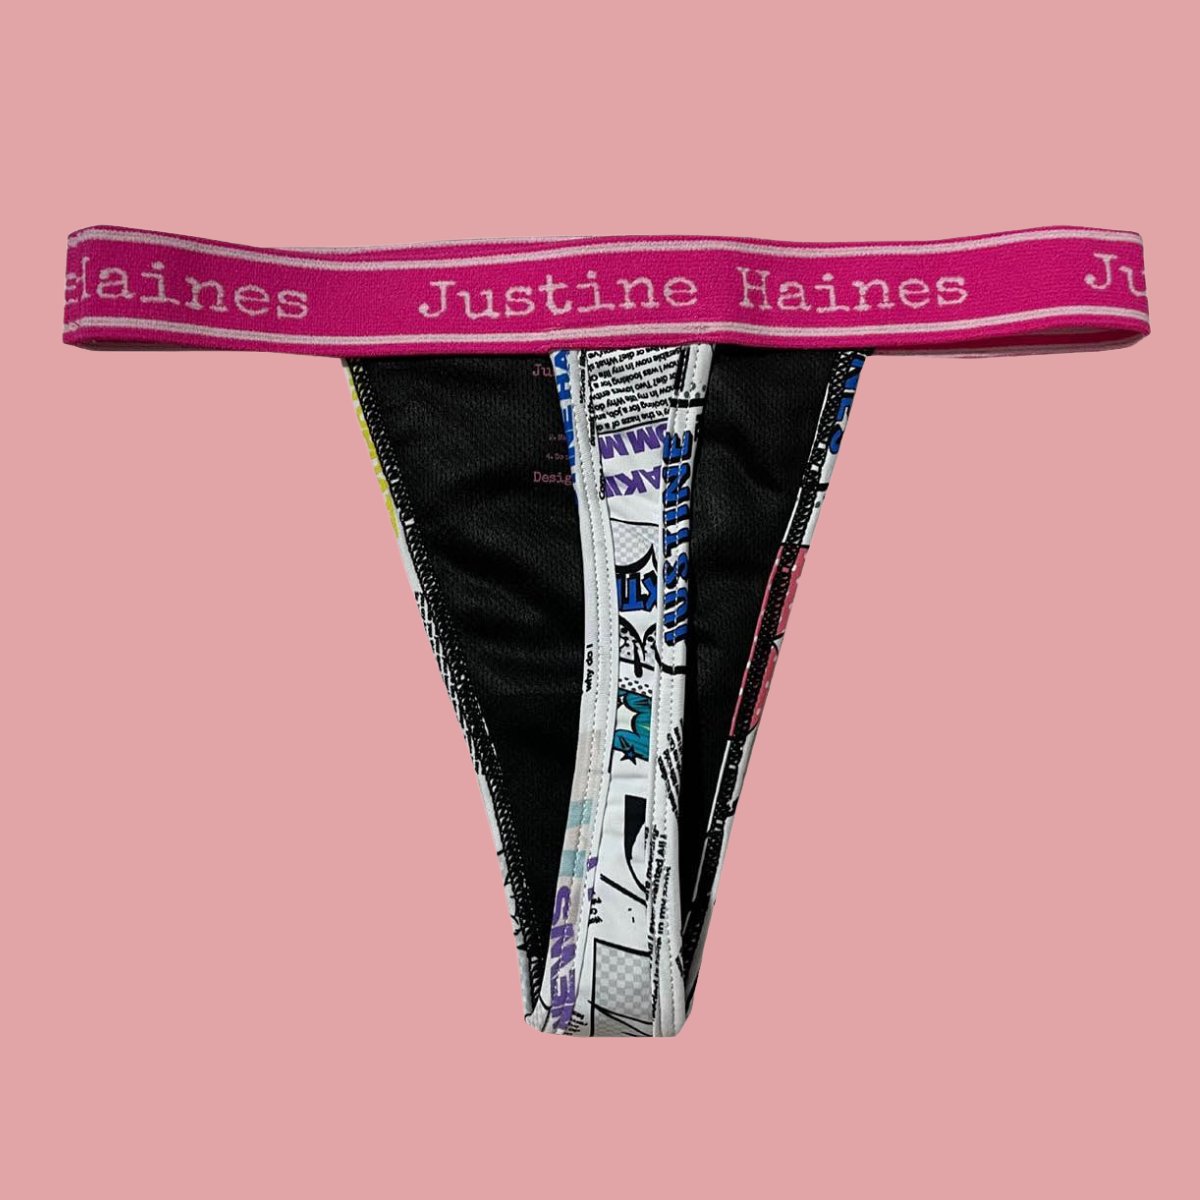 https://www.justinehaines.com/products/wear-thongs-on-your-period-fashion-newspaper-print